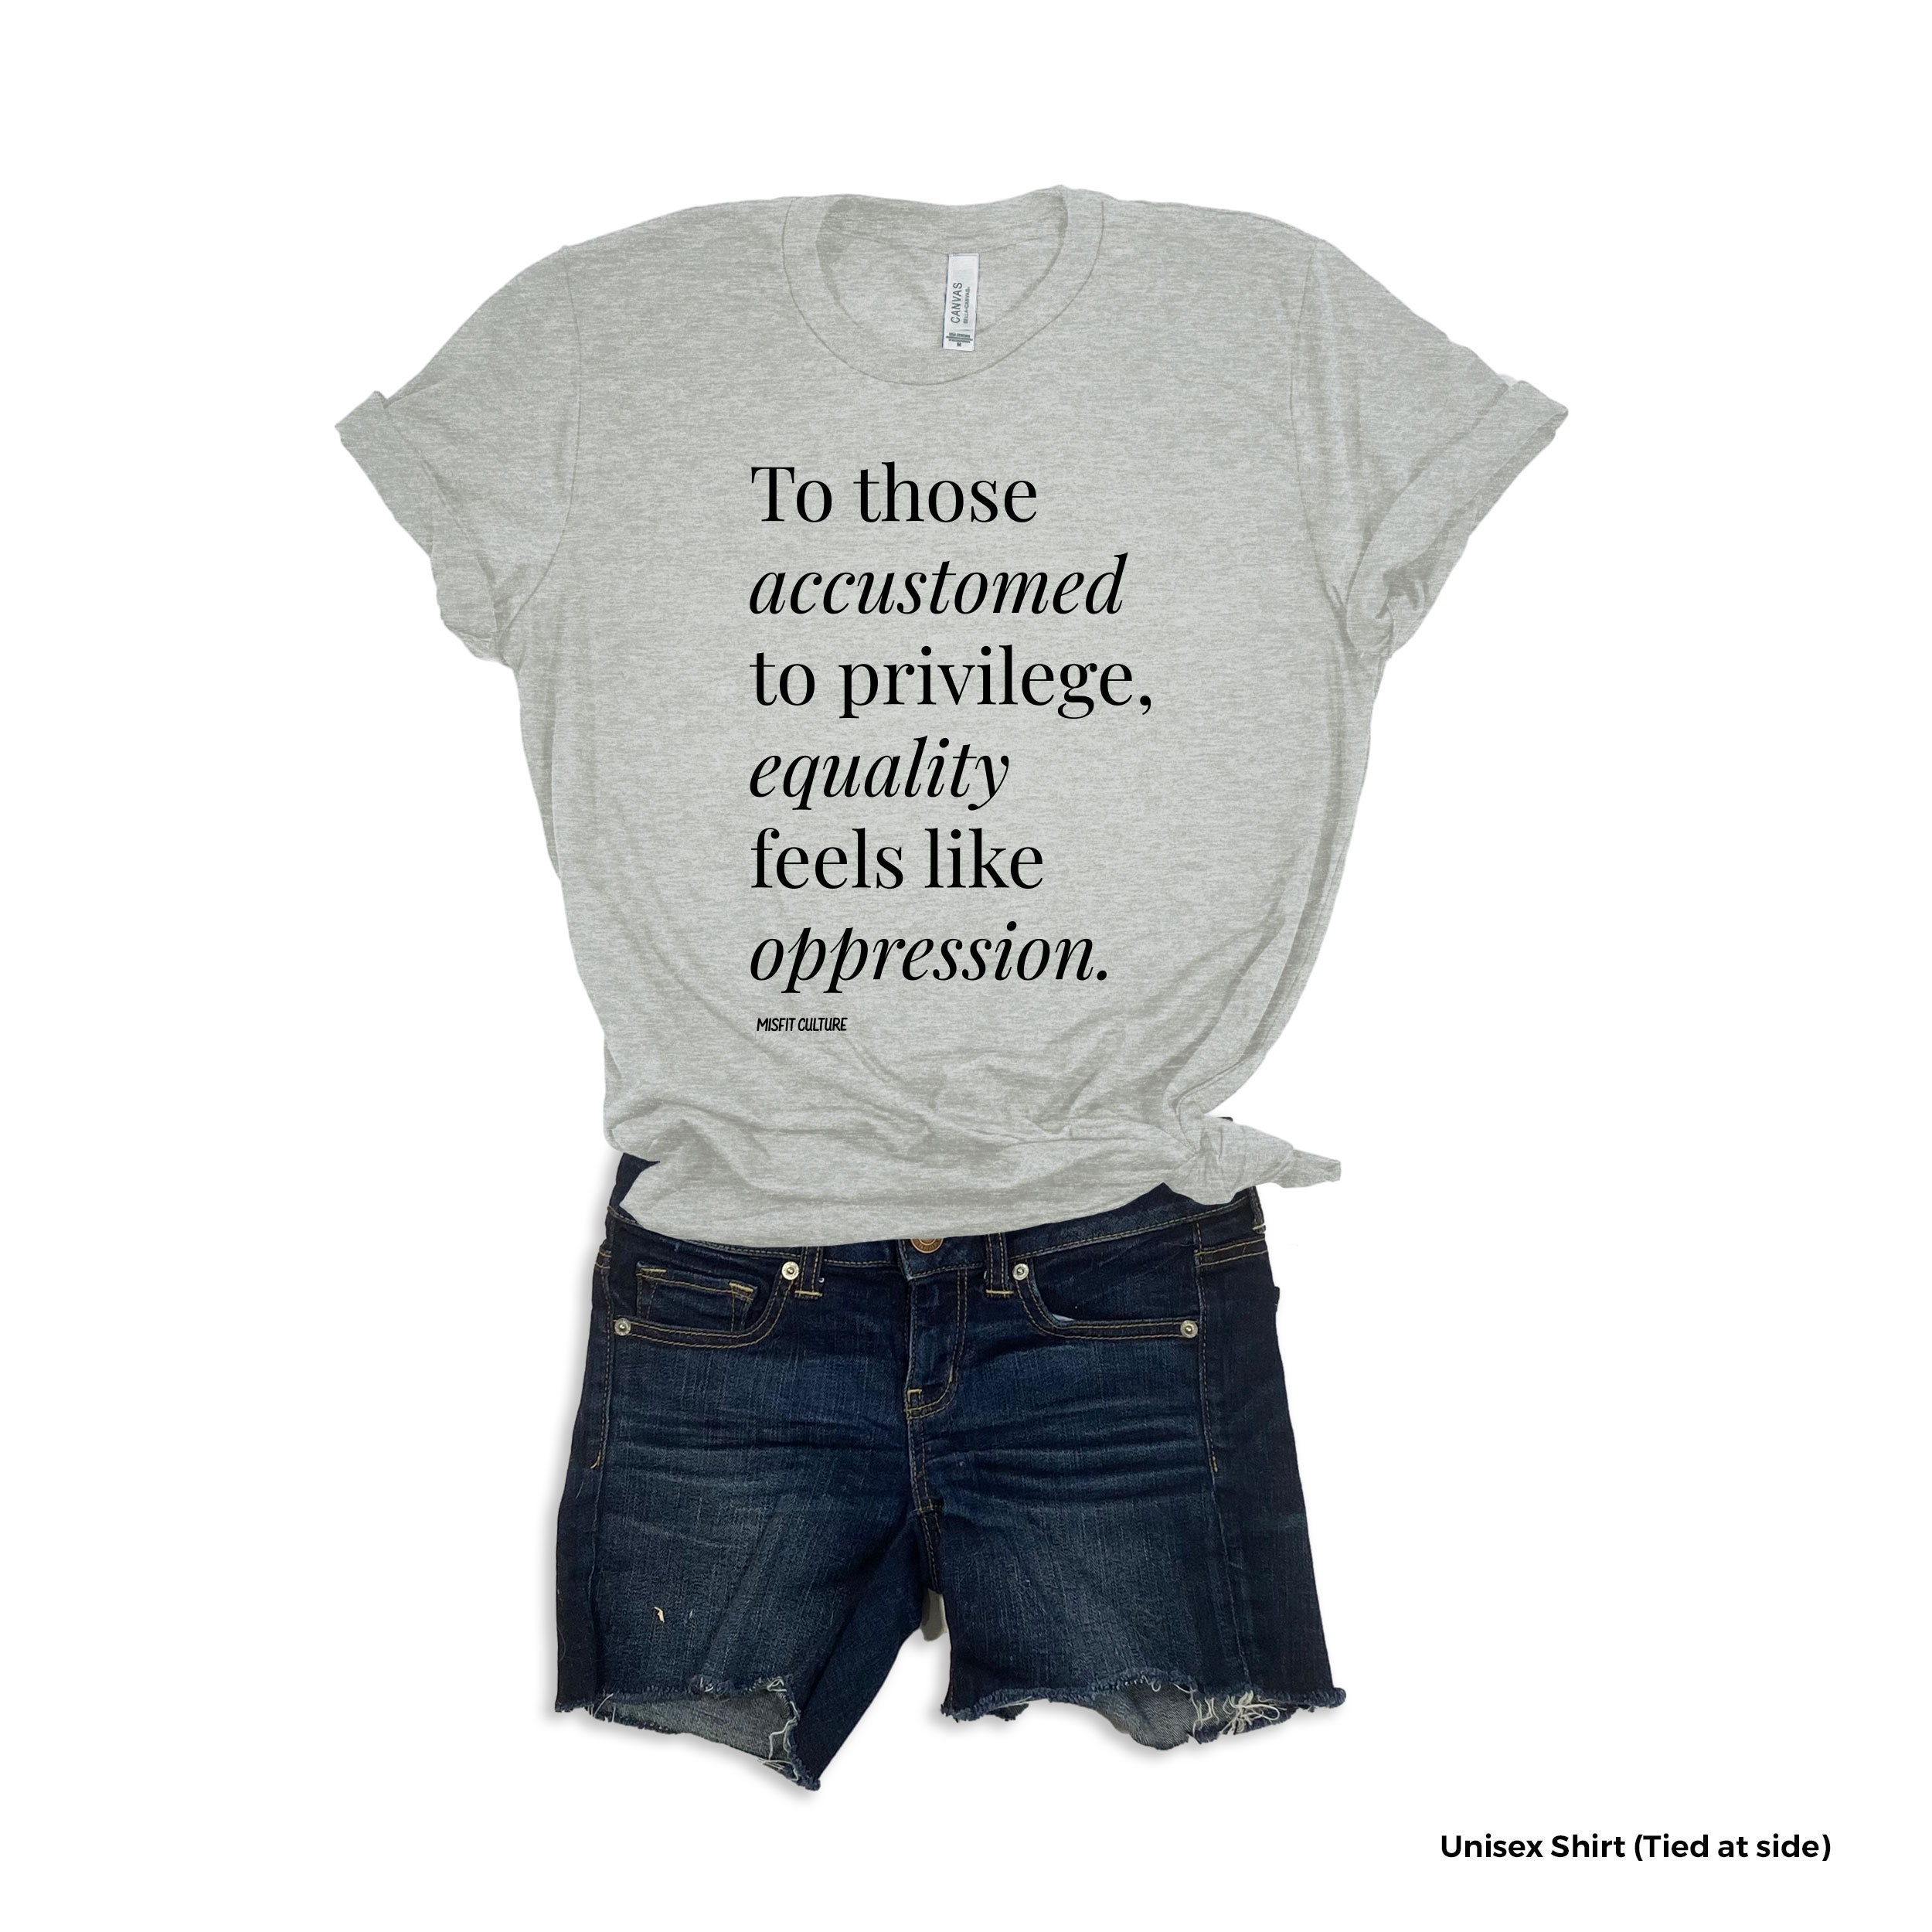 Equality Feels Like Oppression Feminist Protest Resist Check Your Privilege Shirt End Racism Anti White Privilege Tee